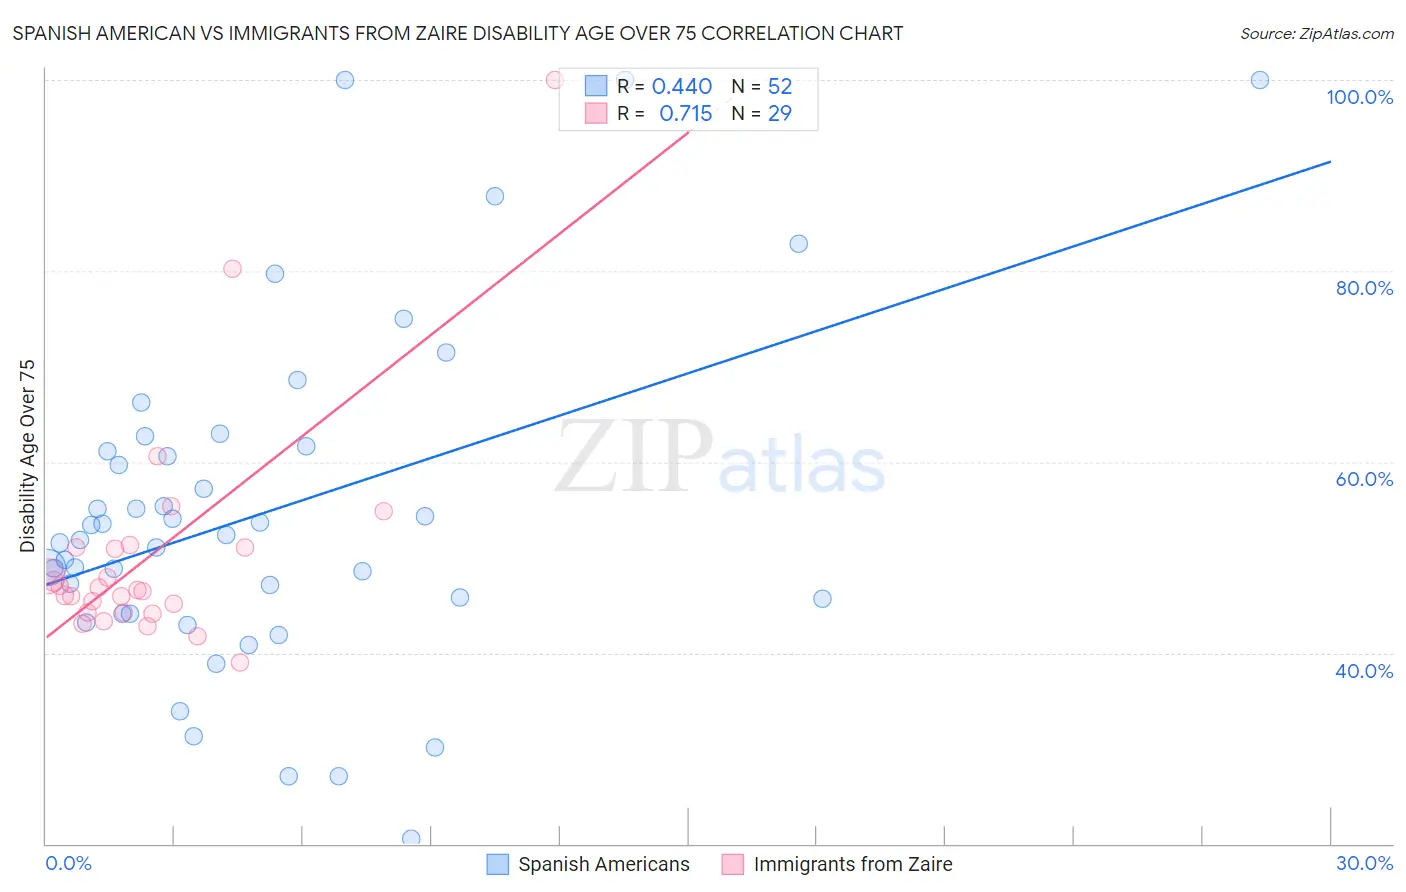 Spanish American vs Immigrants from Zaire Disability Age Over 75